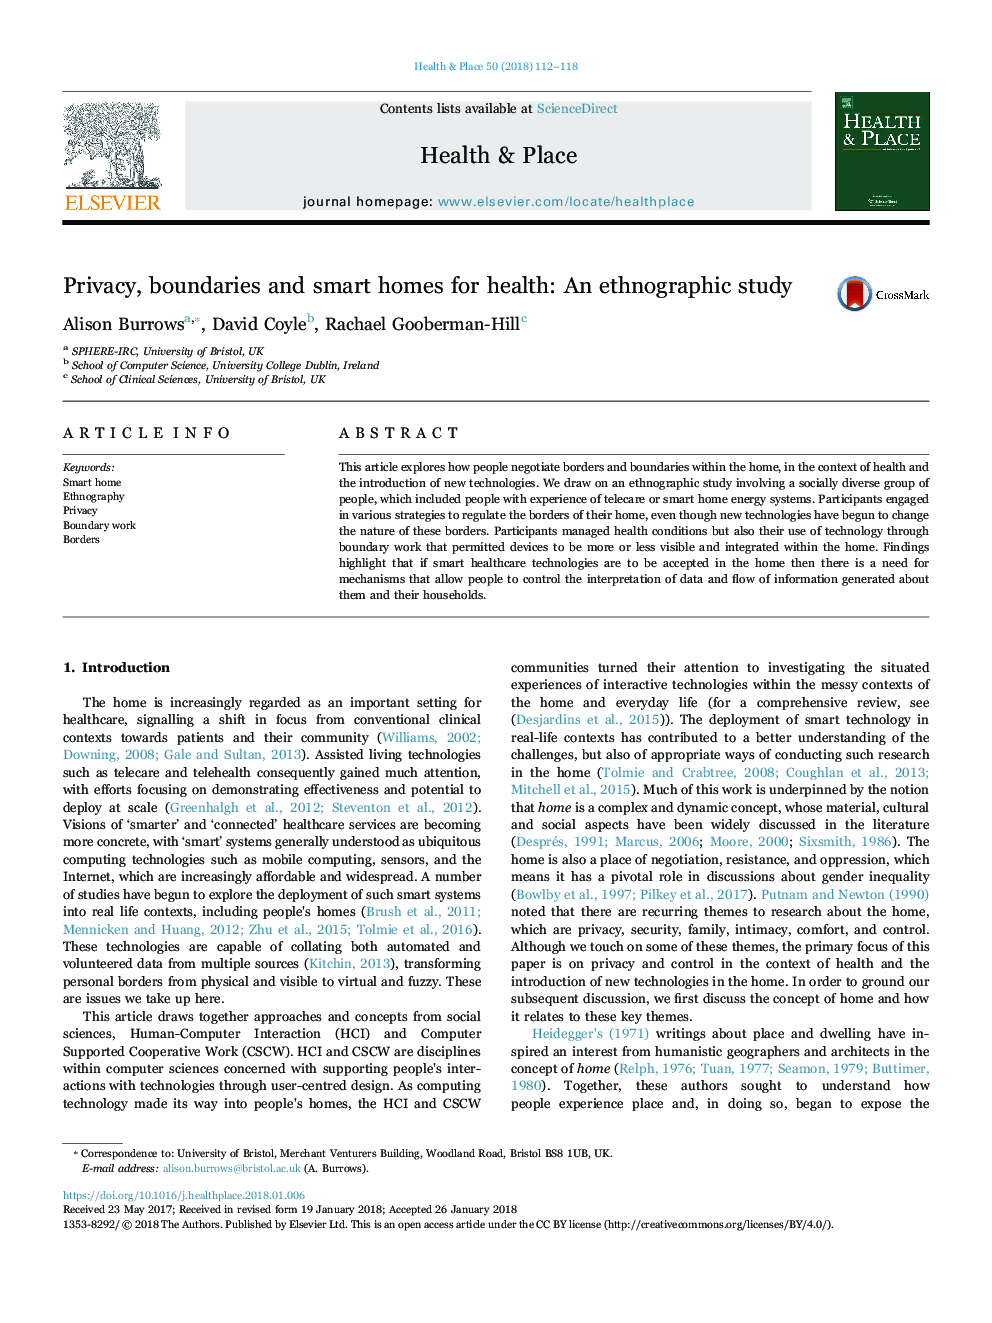 Privacy, boundaries and smart homes for health: An ethnographic study